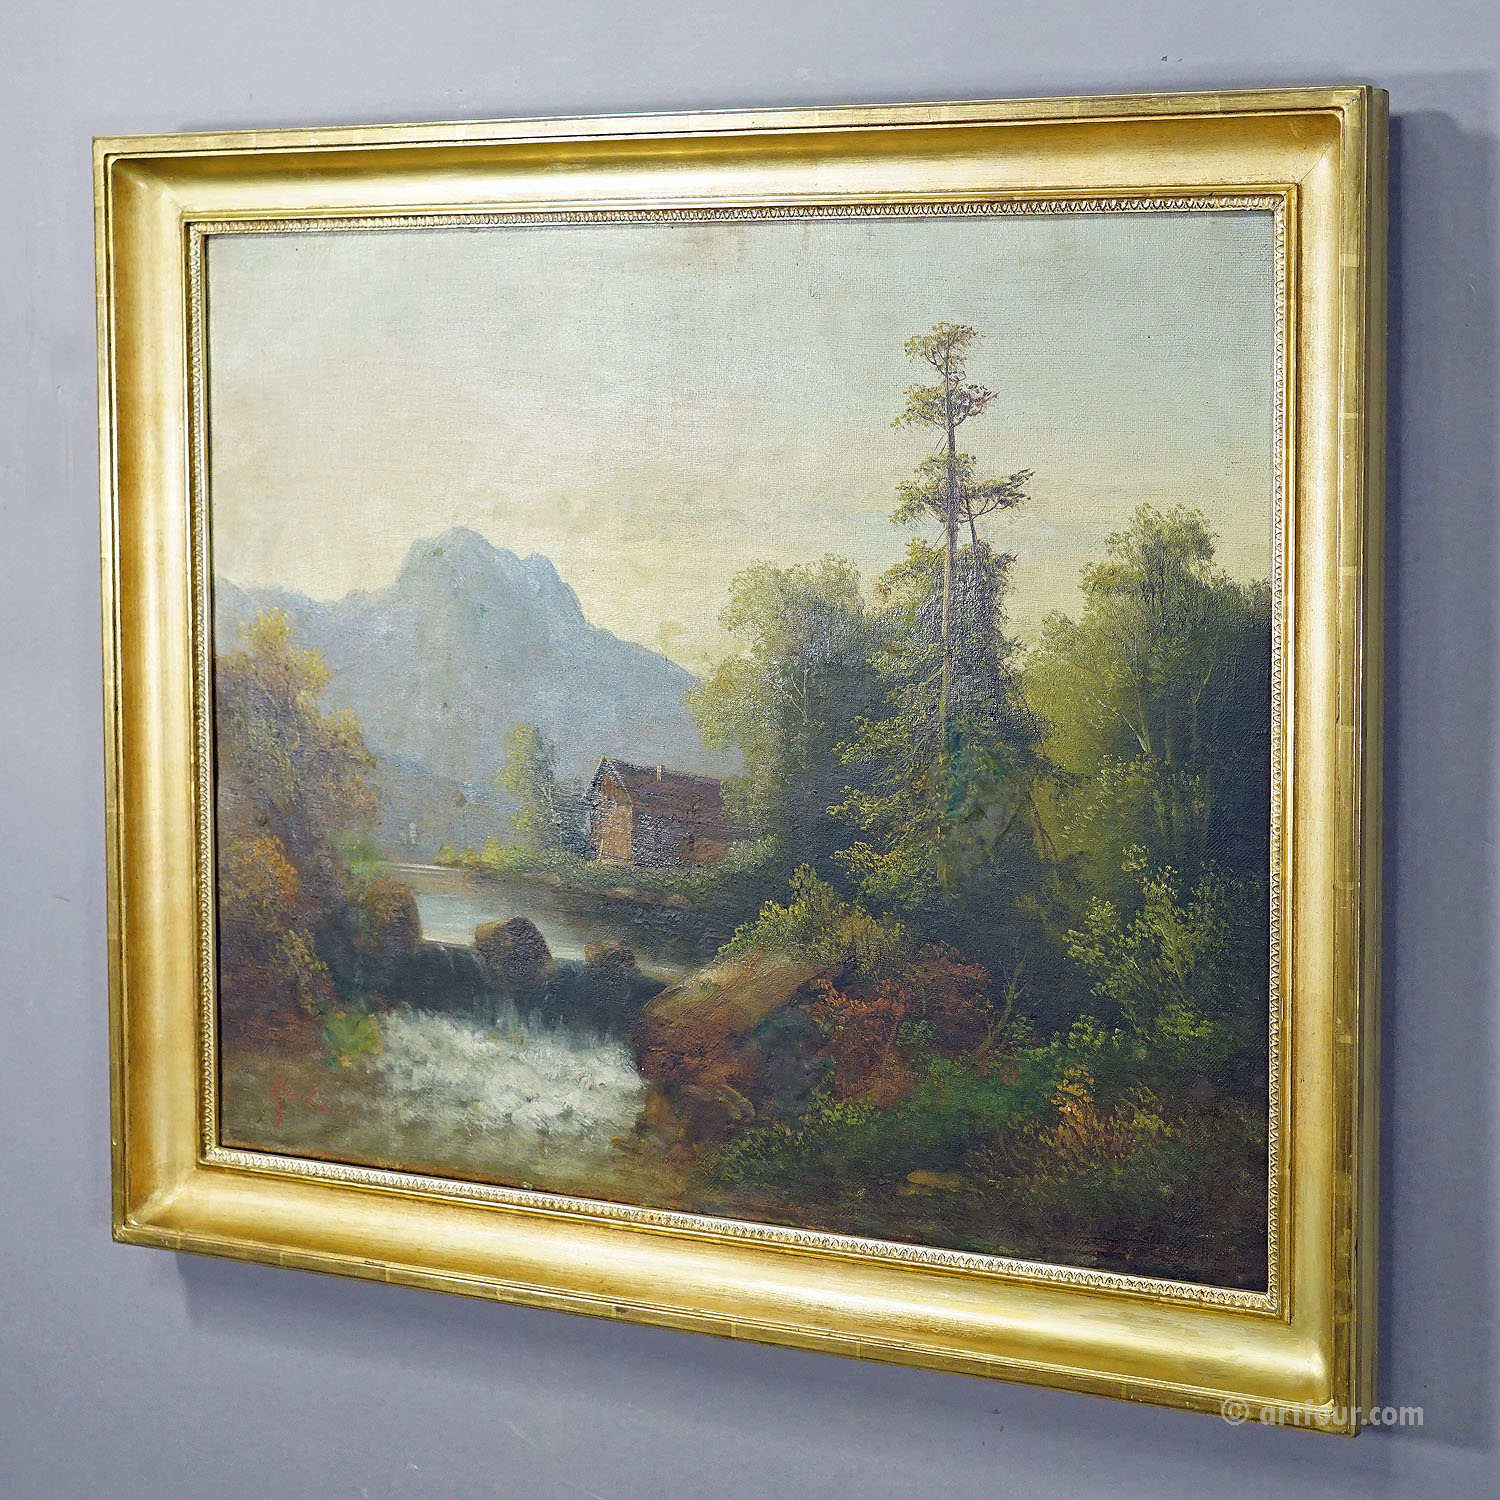 Painting Summerly Mountain Landscape with Water Fall and Mountain Hut, 19th century